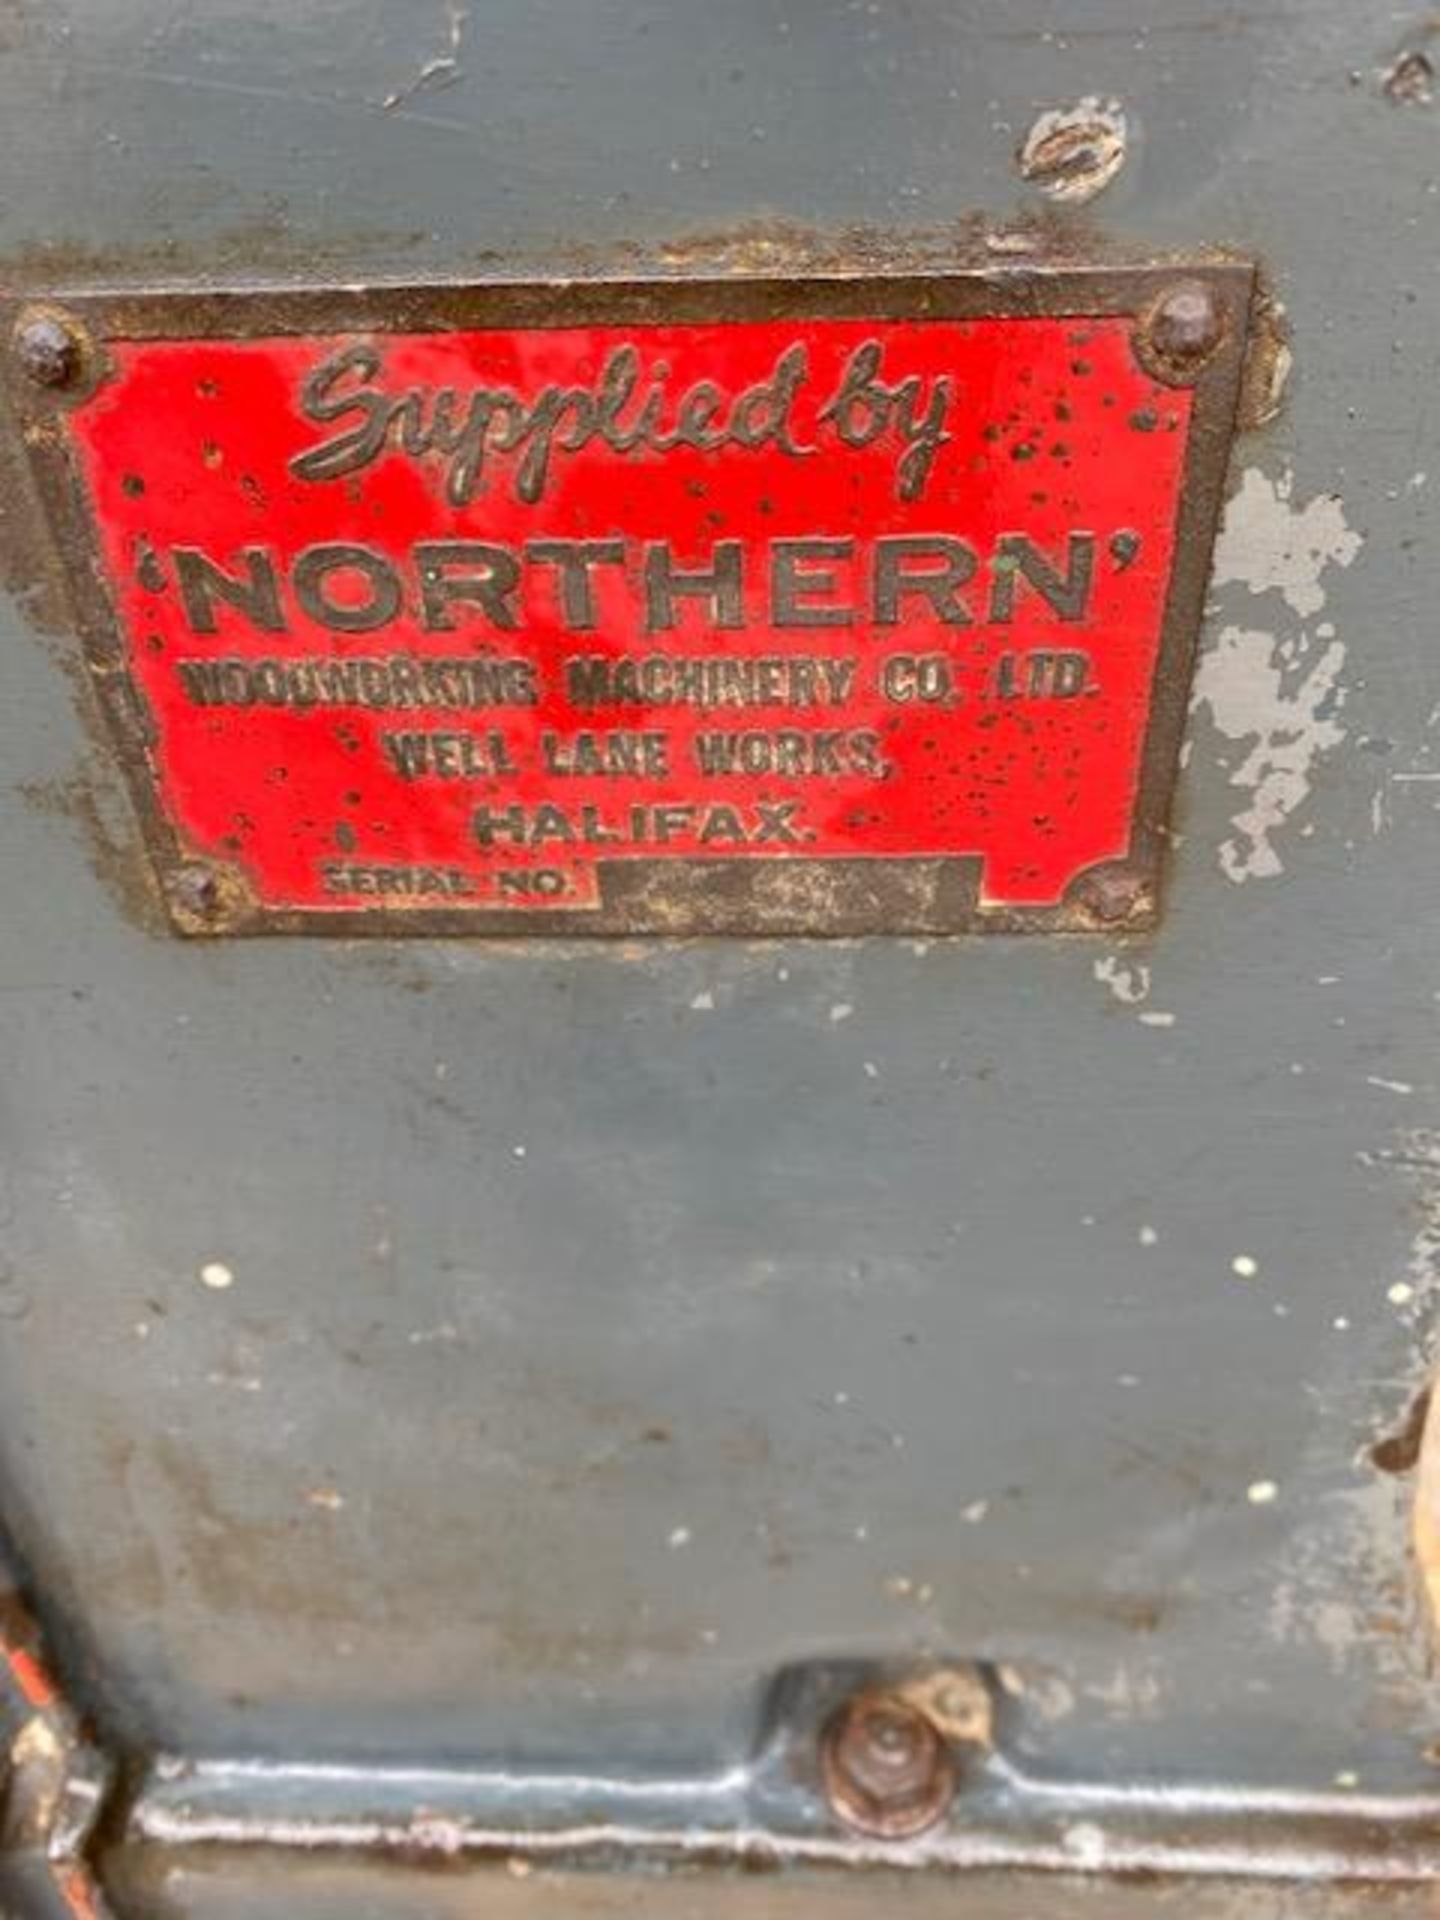 Northern 12in. x 9in. Planer Thicknesser (vendors comments - good condition), lot location - - Image 2 of 6